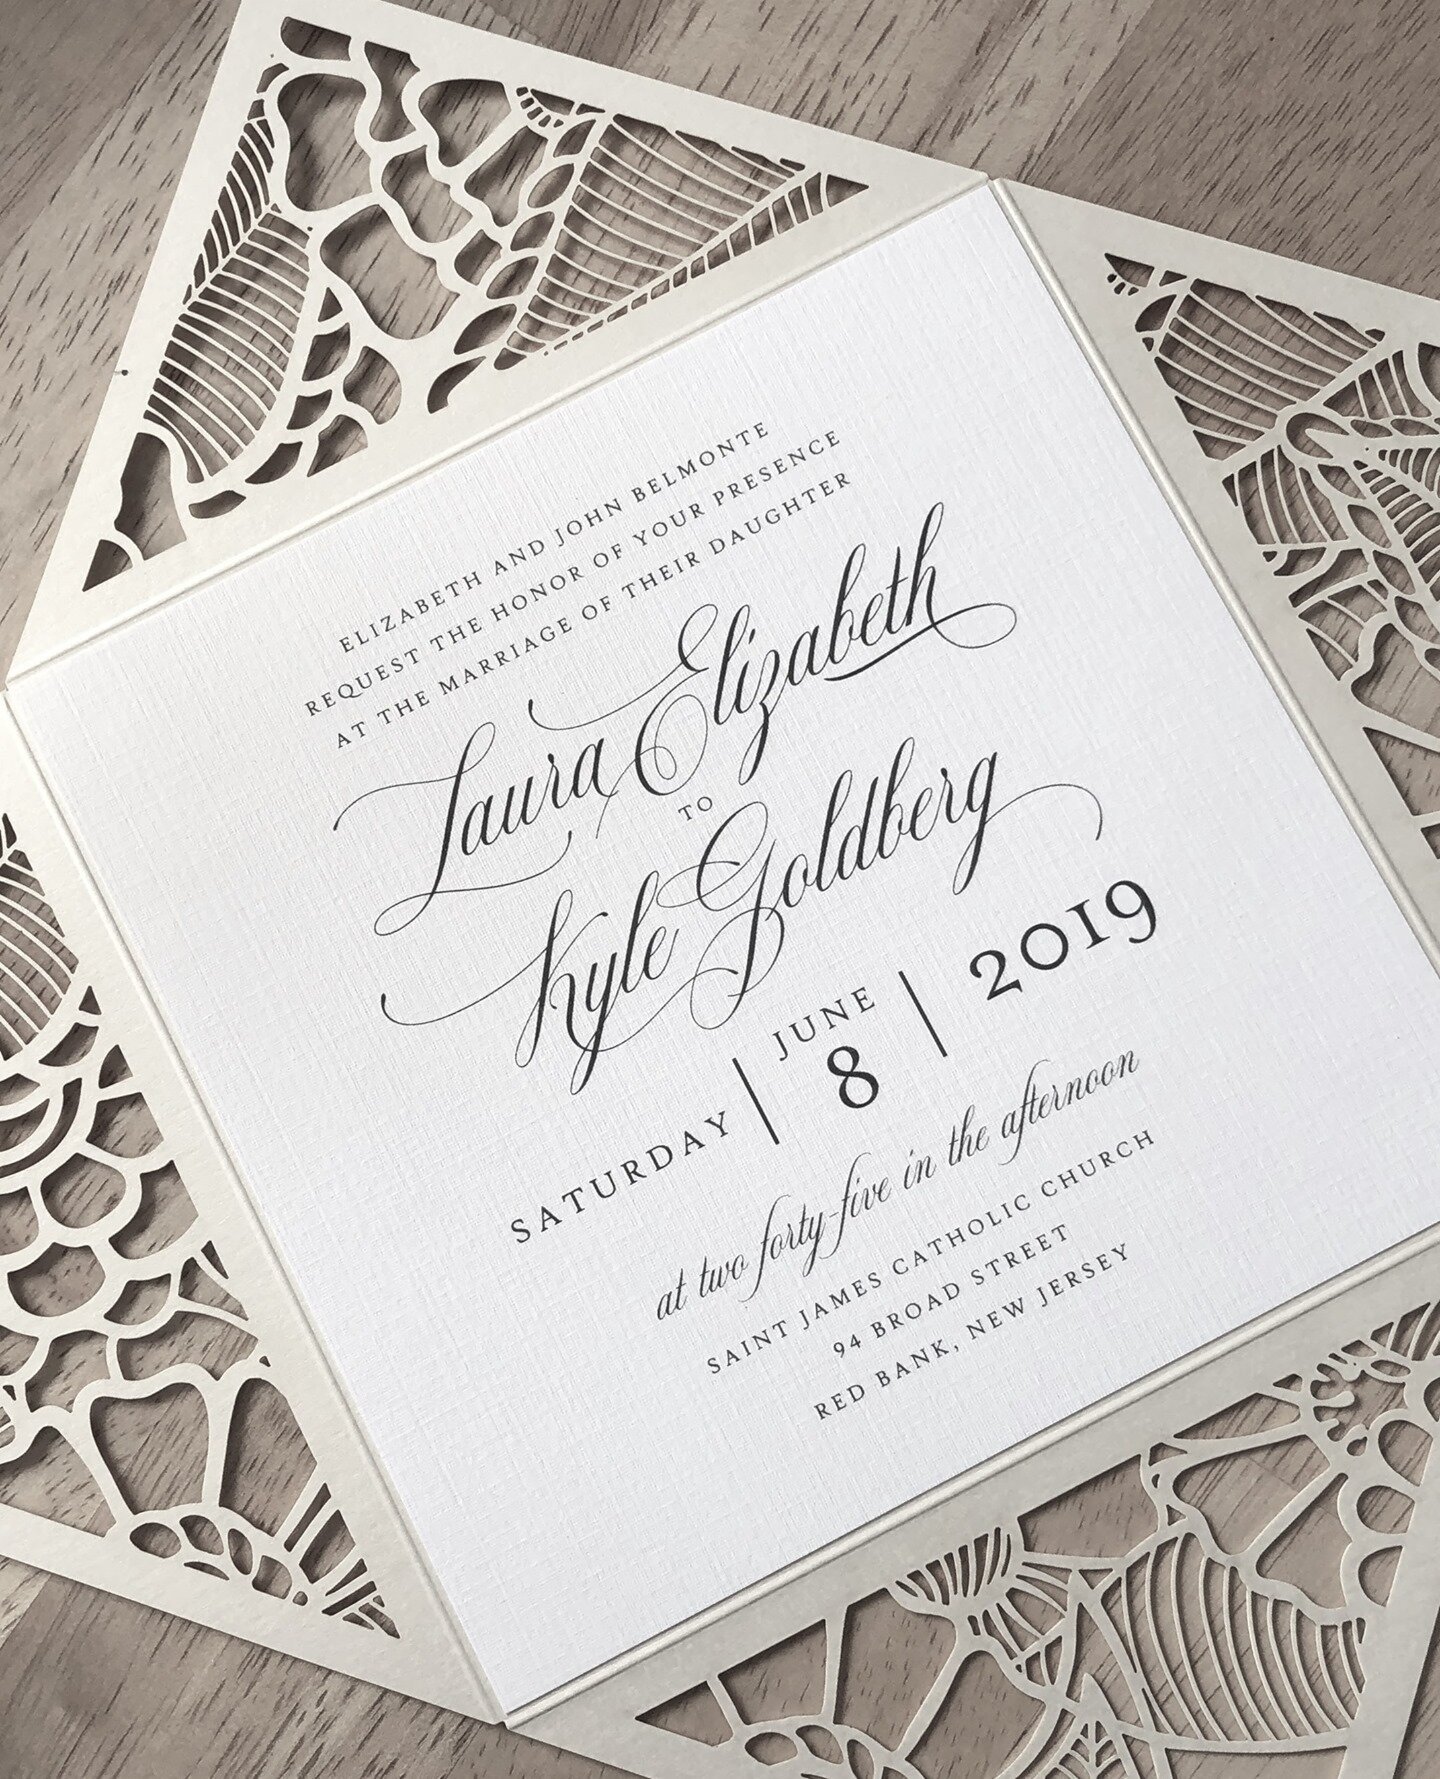 One of my favorite designs from 2019. I love how it feels traditional but also updated and fresh at the same time. 💌⁠
::⁠
#weddinginvitations #weddinginvites #formalinvites #custominvitations #graphicdesign #njweddinginvitations #njgraphicdesign #nj